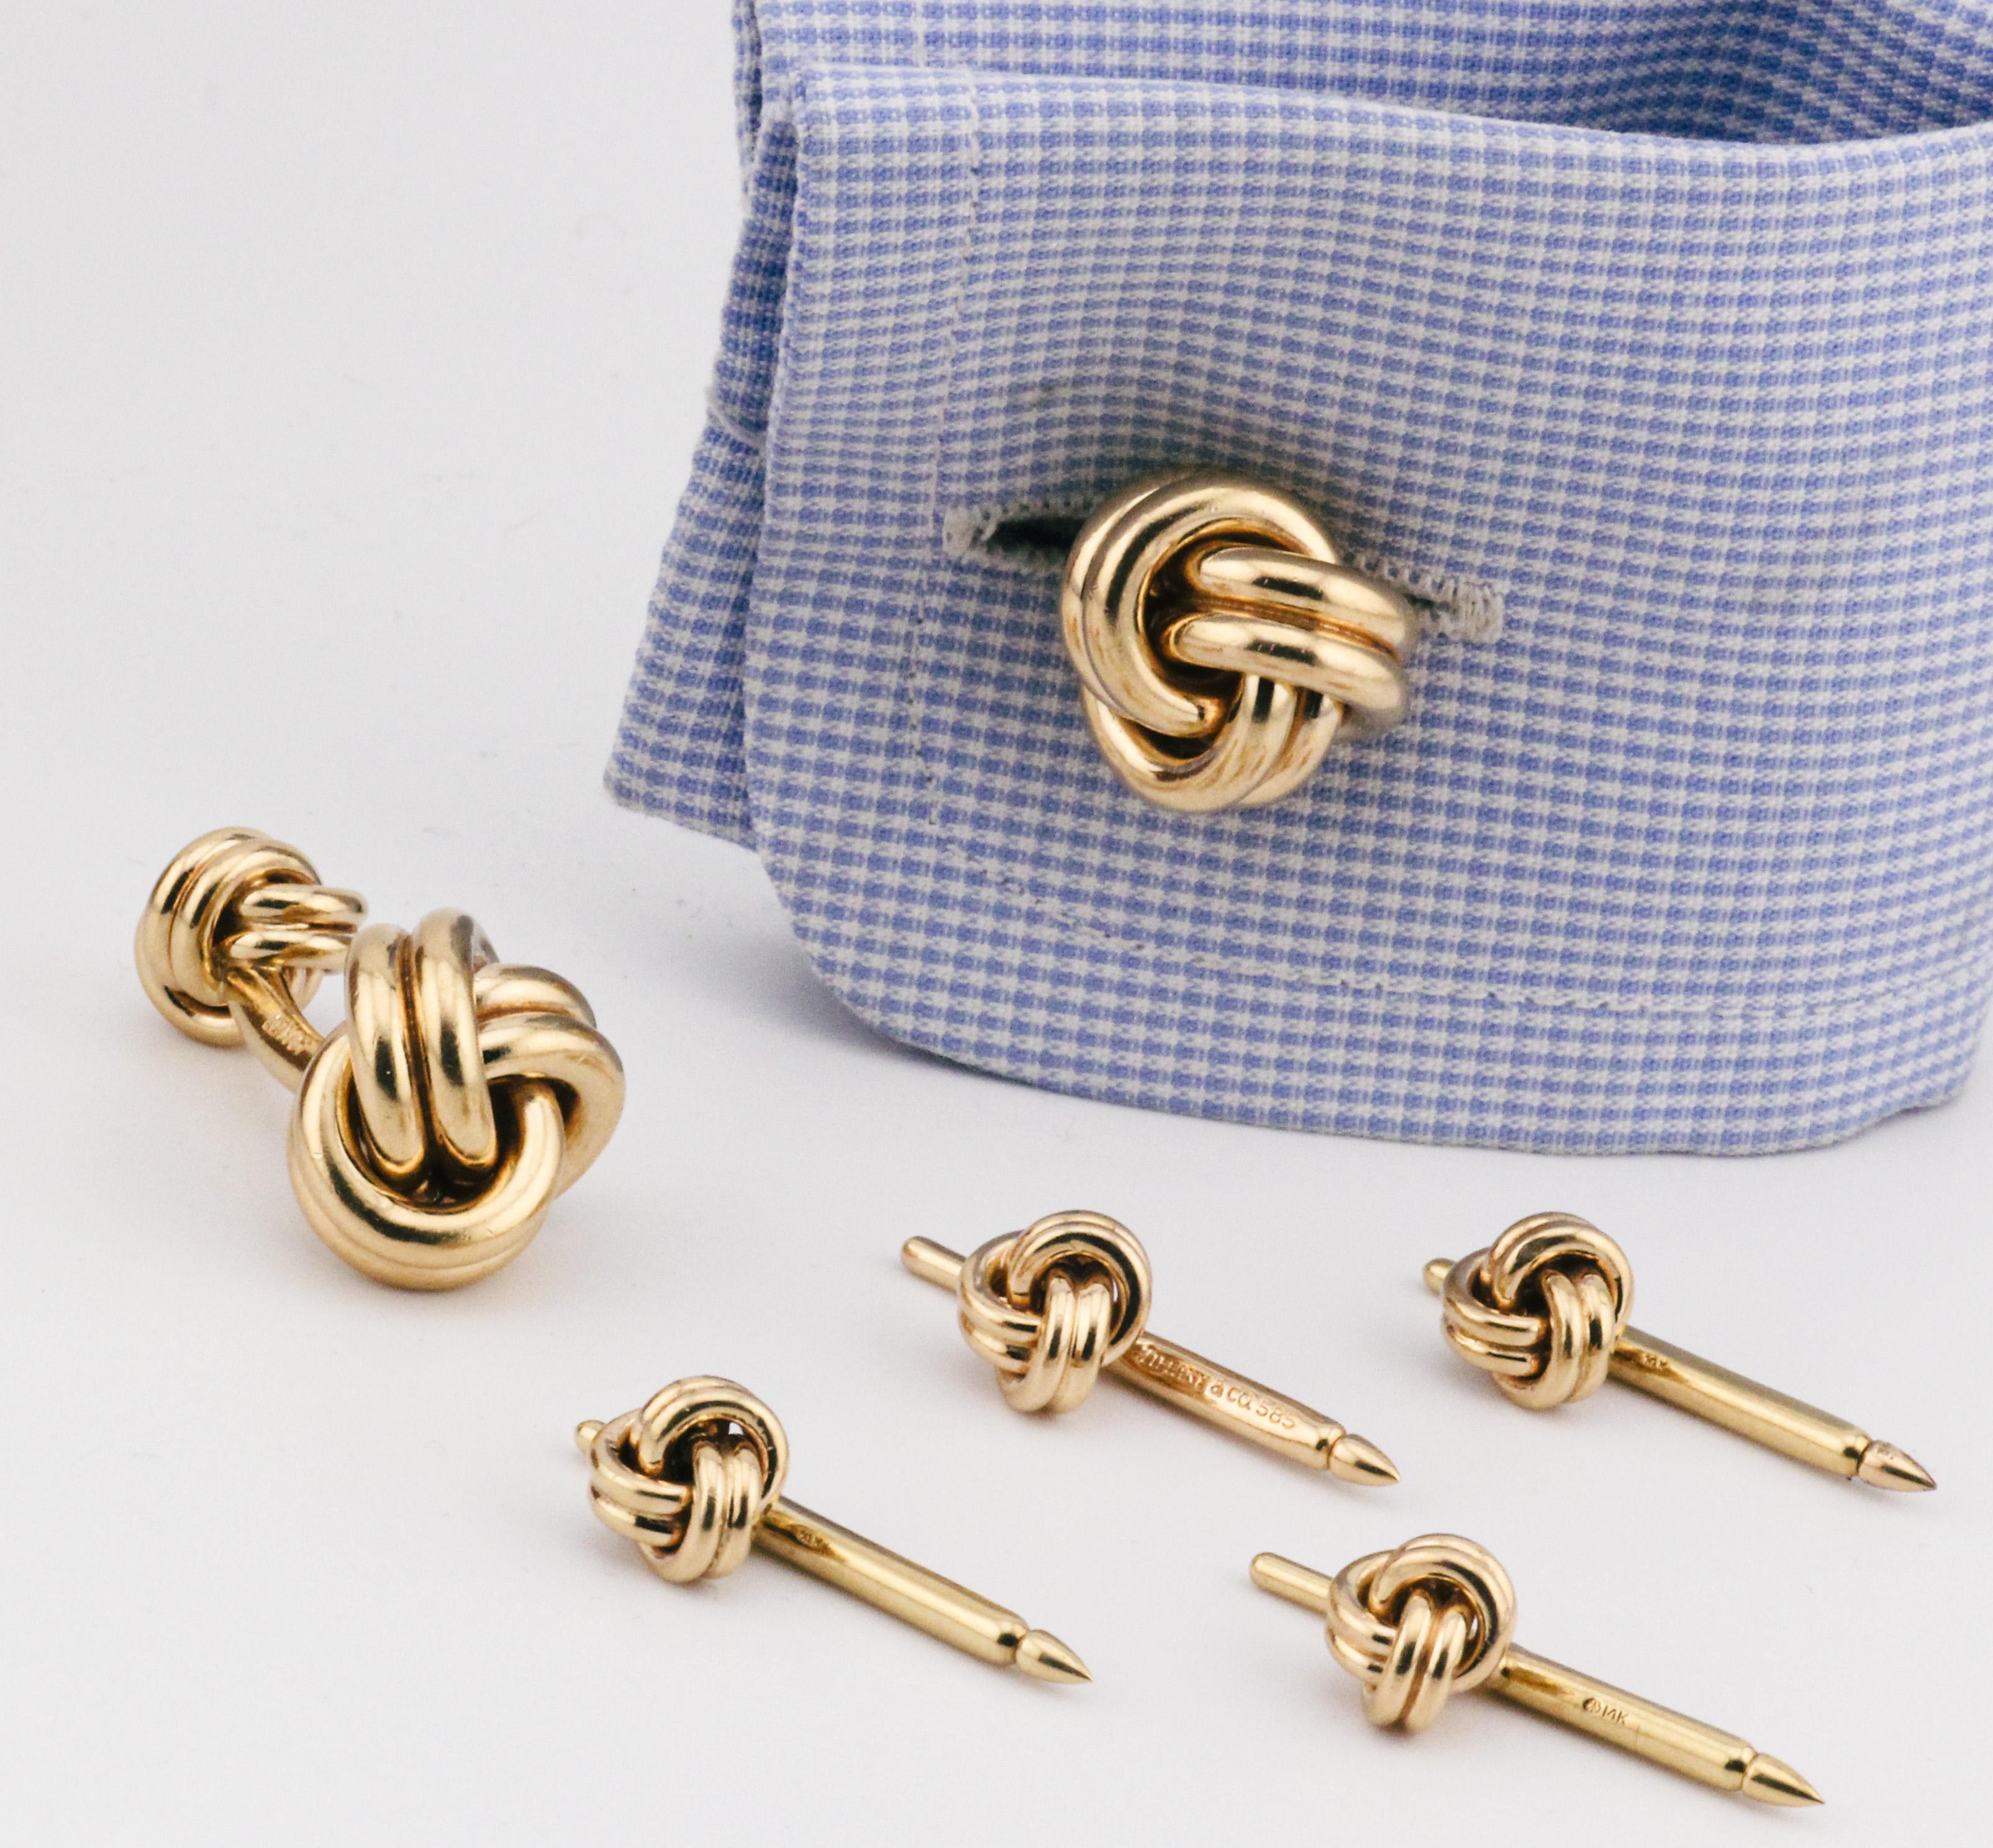 Tiffany & Co. 14K Yellow Gold Knot Cufflinks and 4 Studs Set For Sale 9